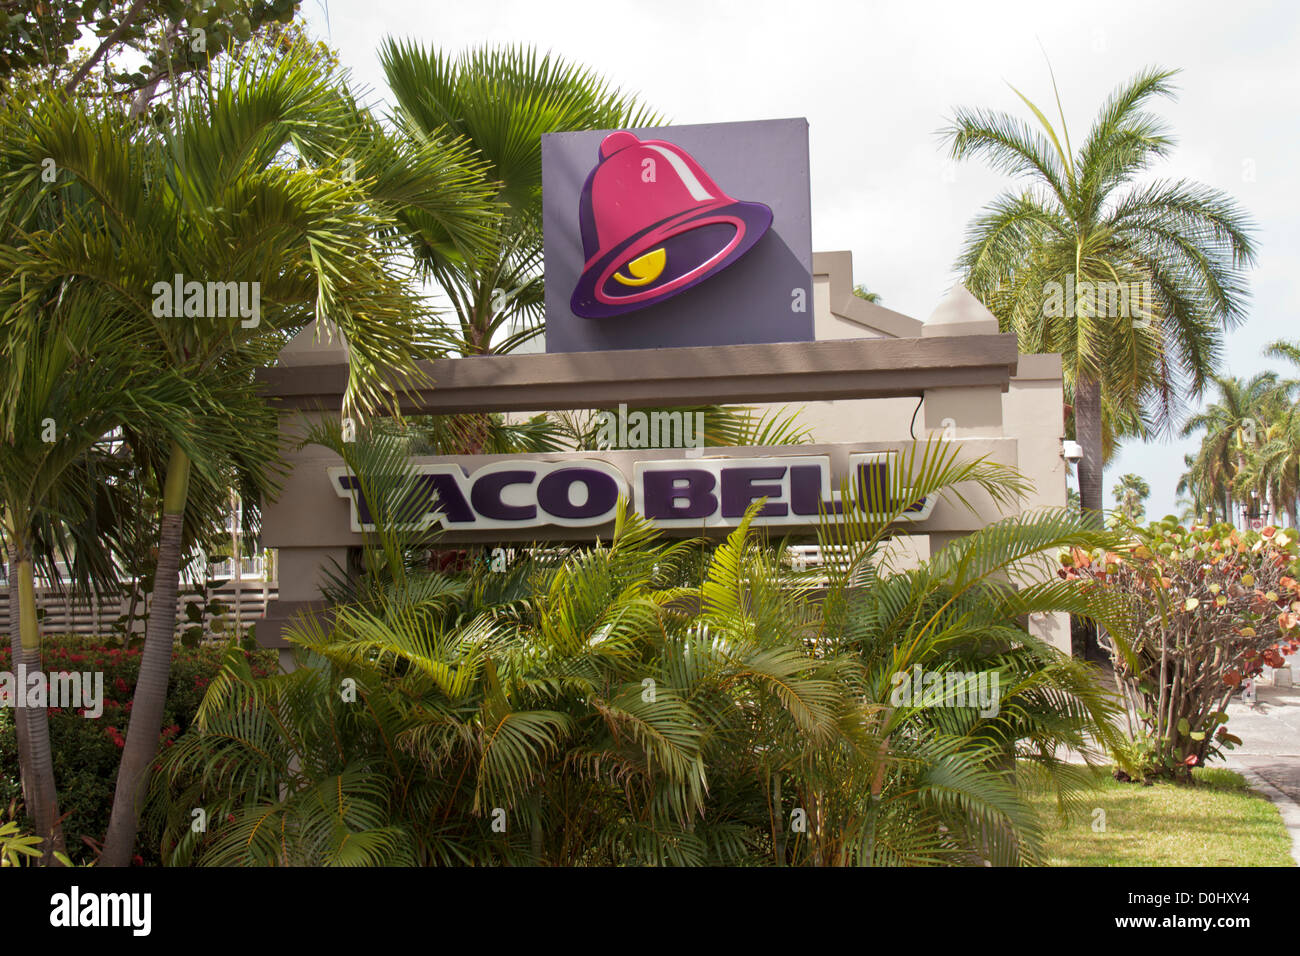 Taco Bell Mexican Fast Food Restaurant sign on the Caribbean island of Aruba Stock Photo